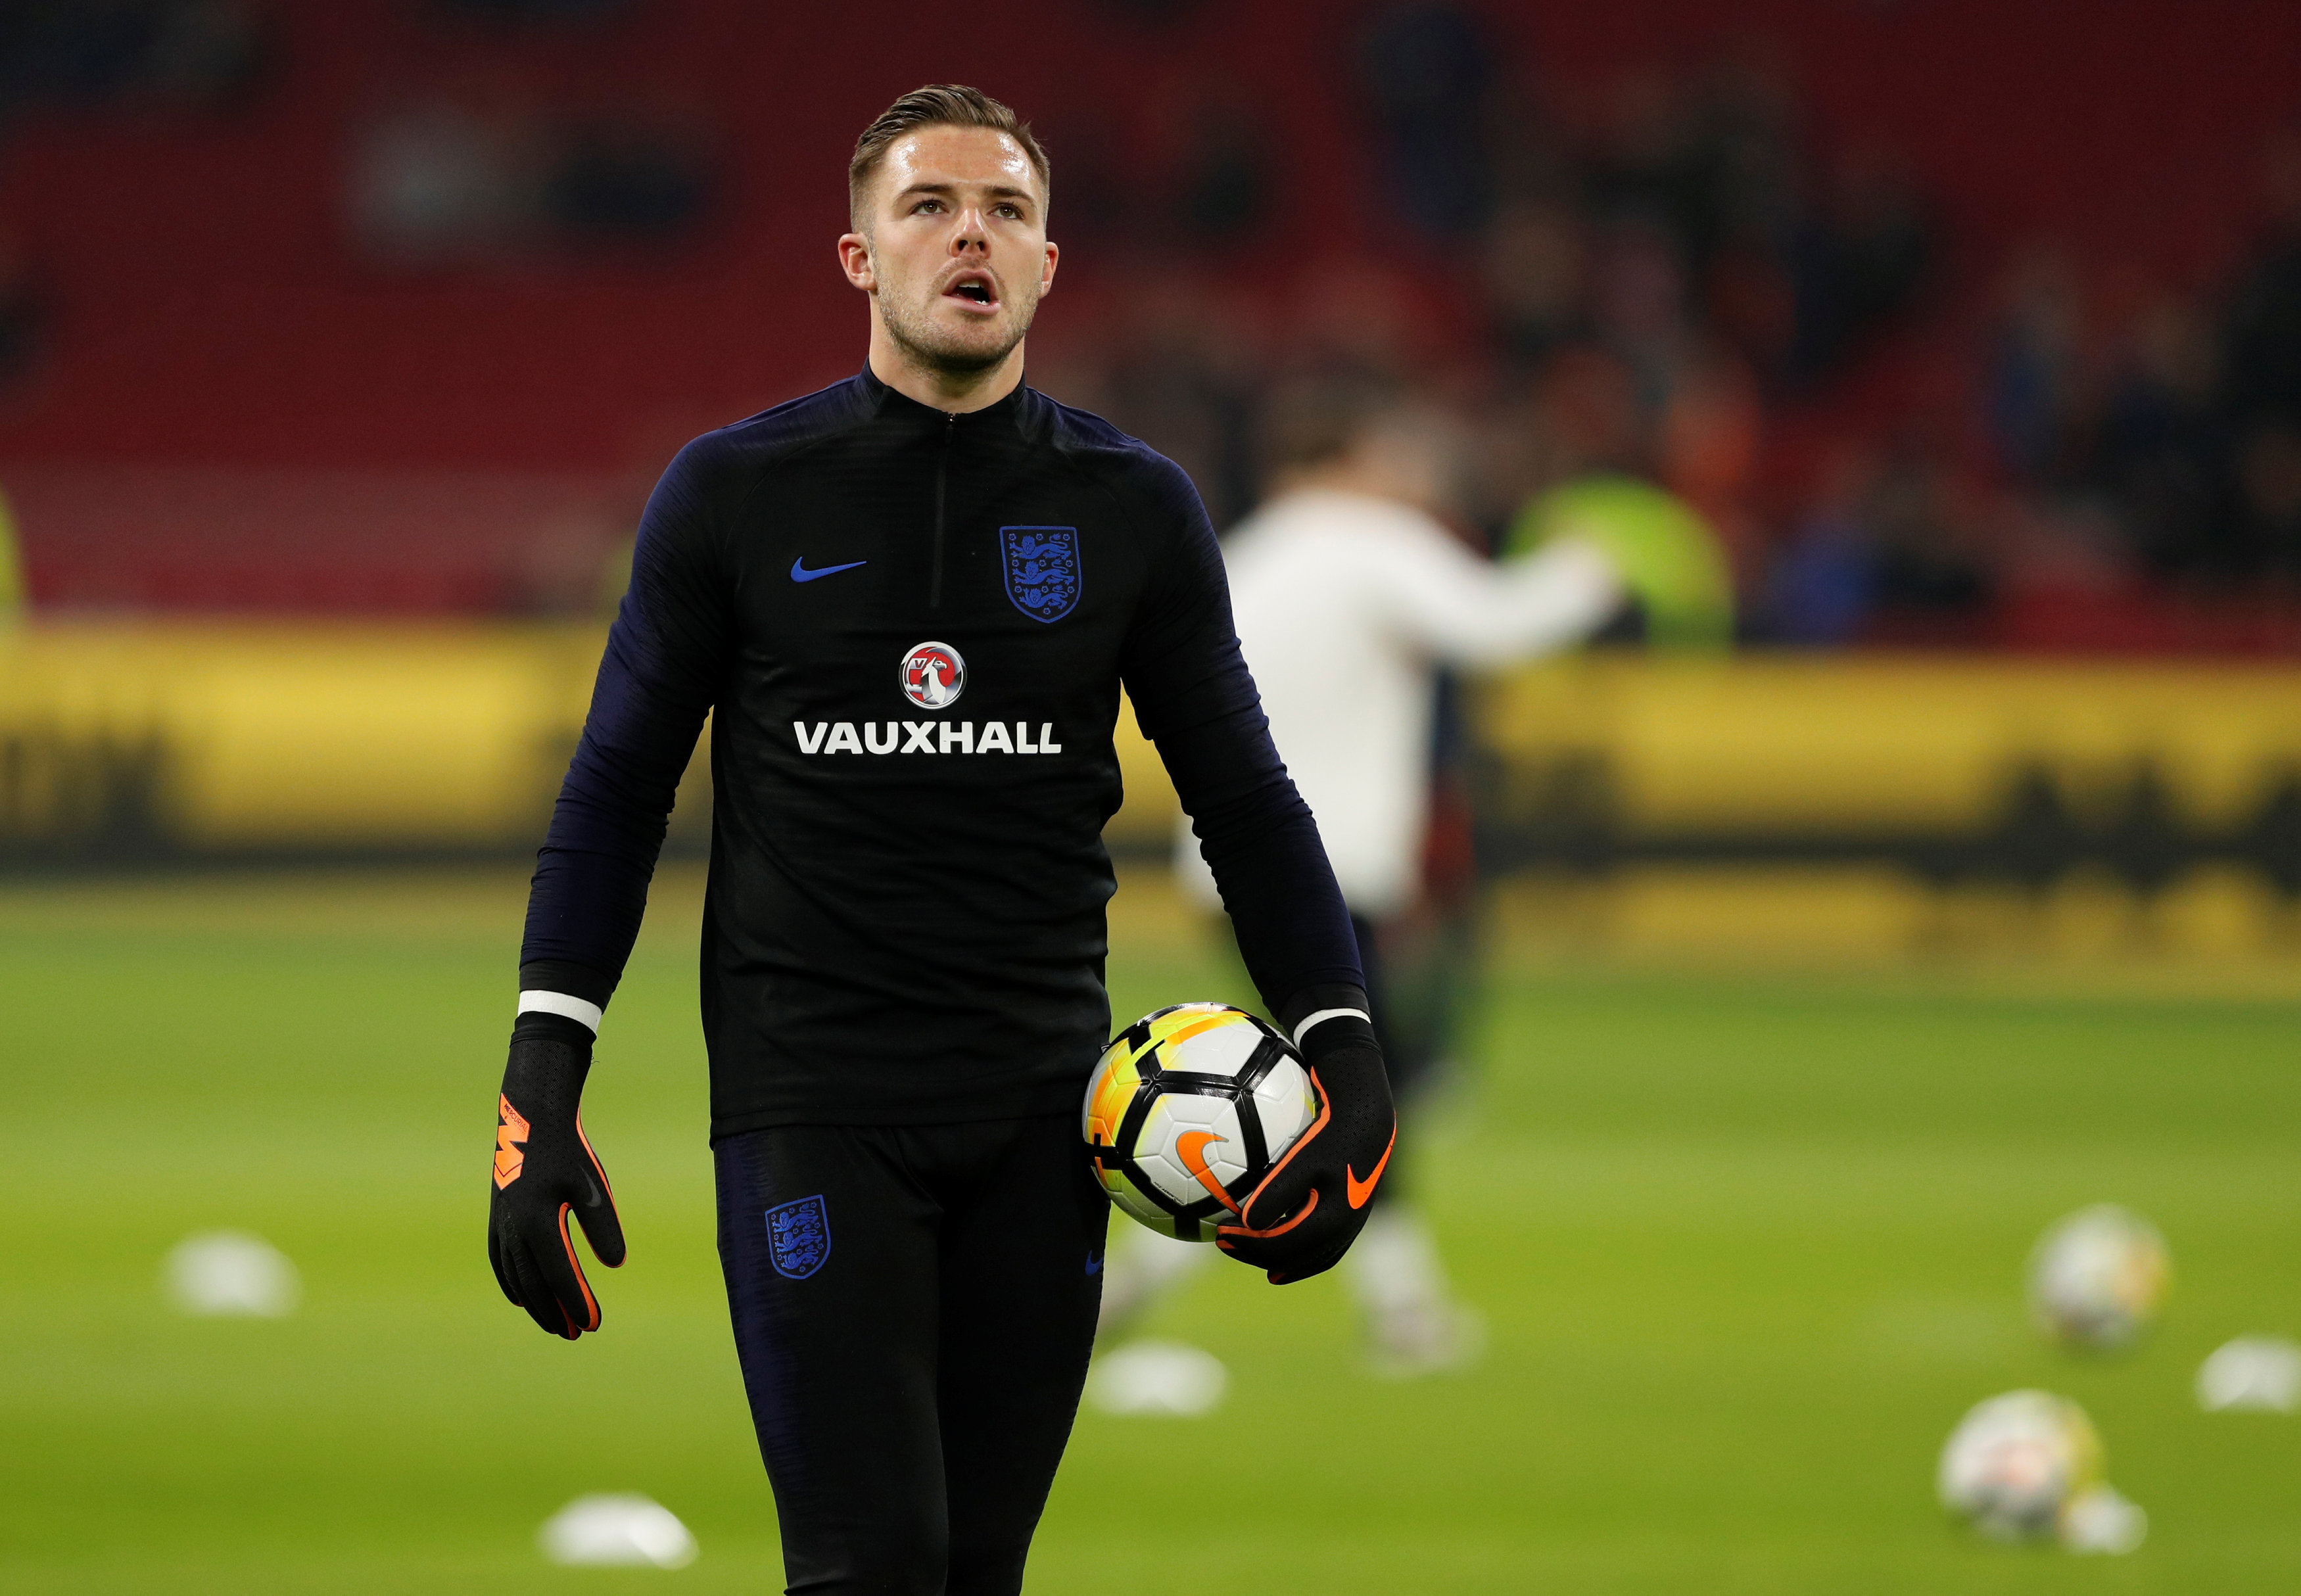 Football: Butland to play in goal for England against Italy